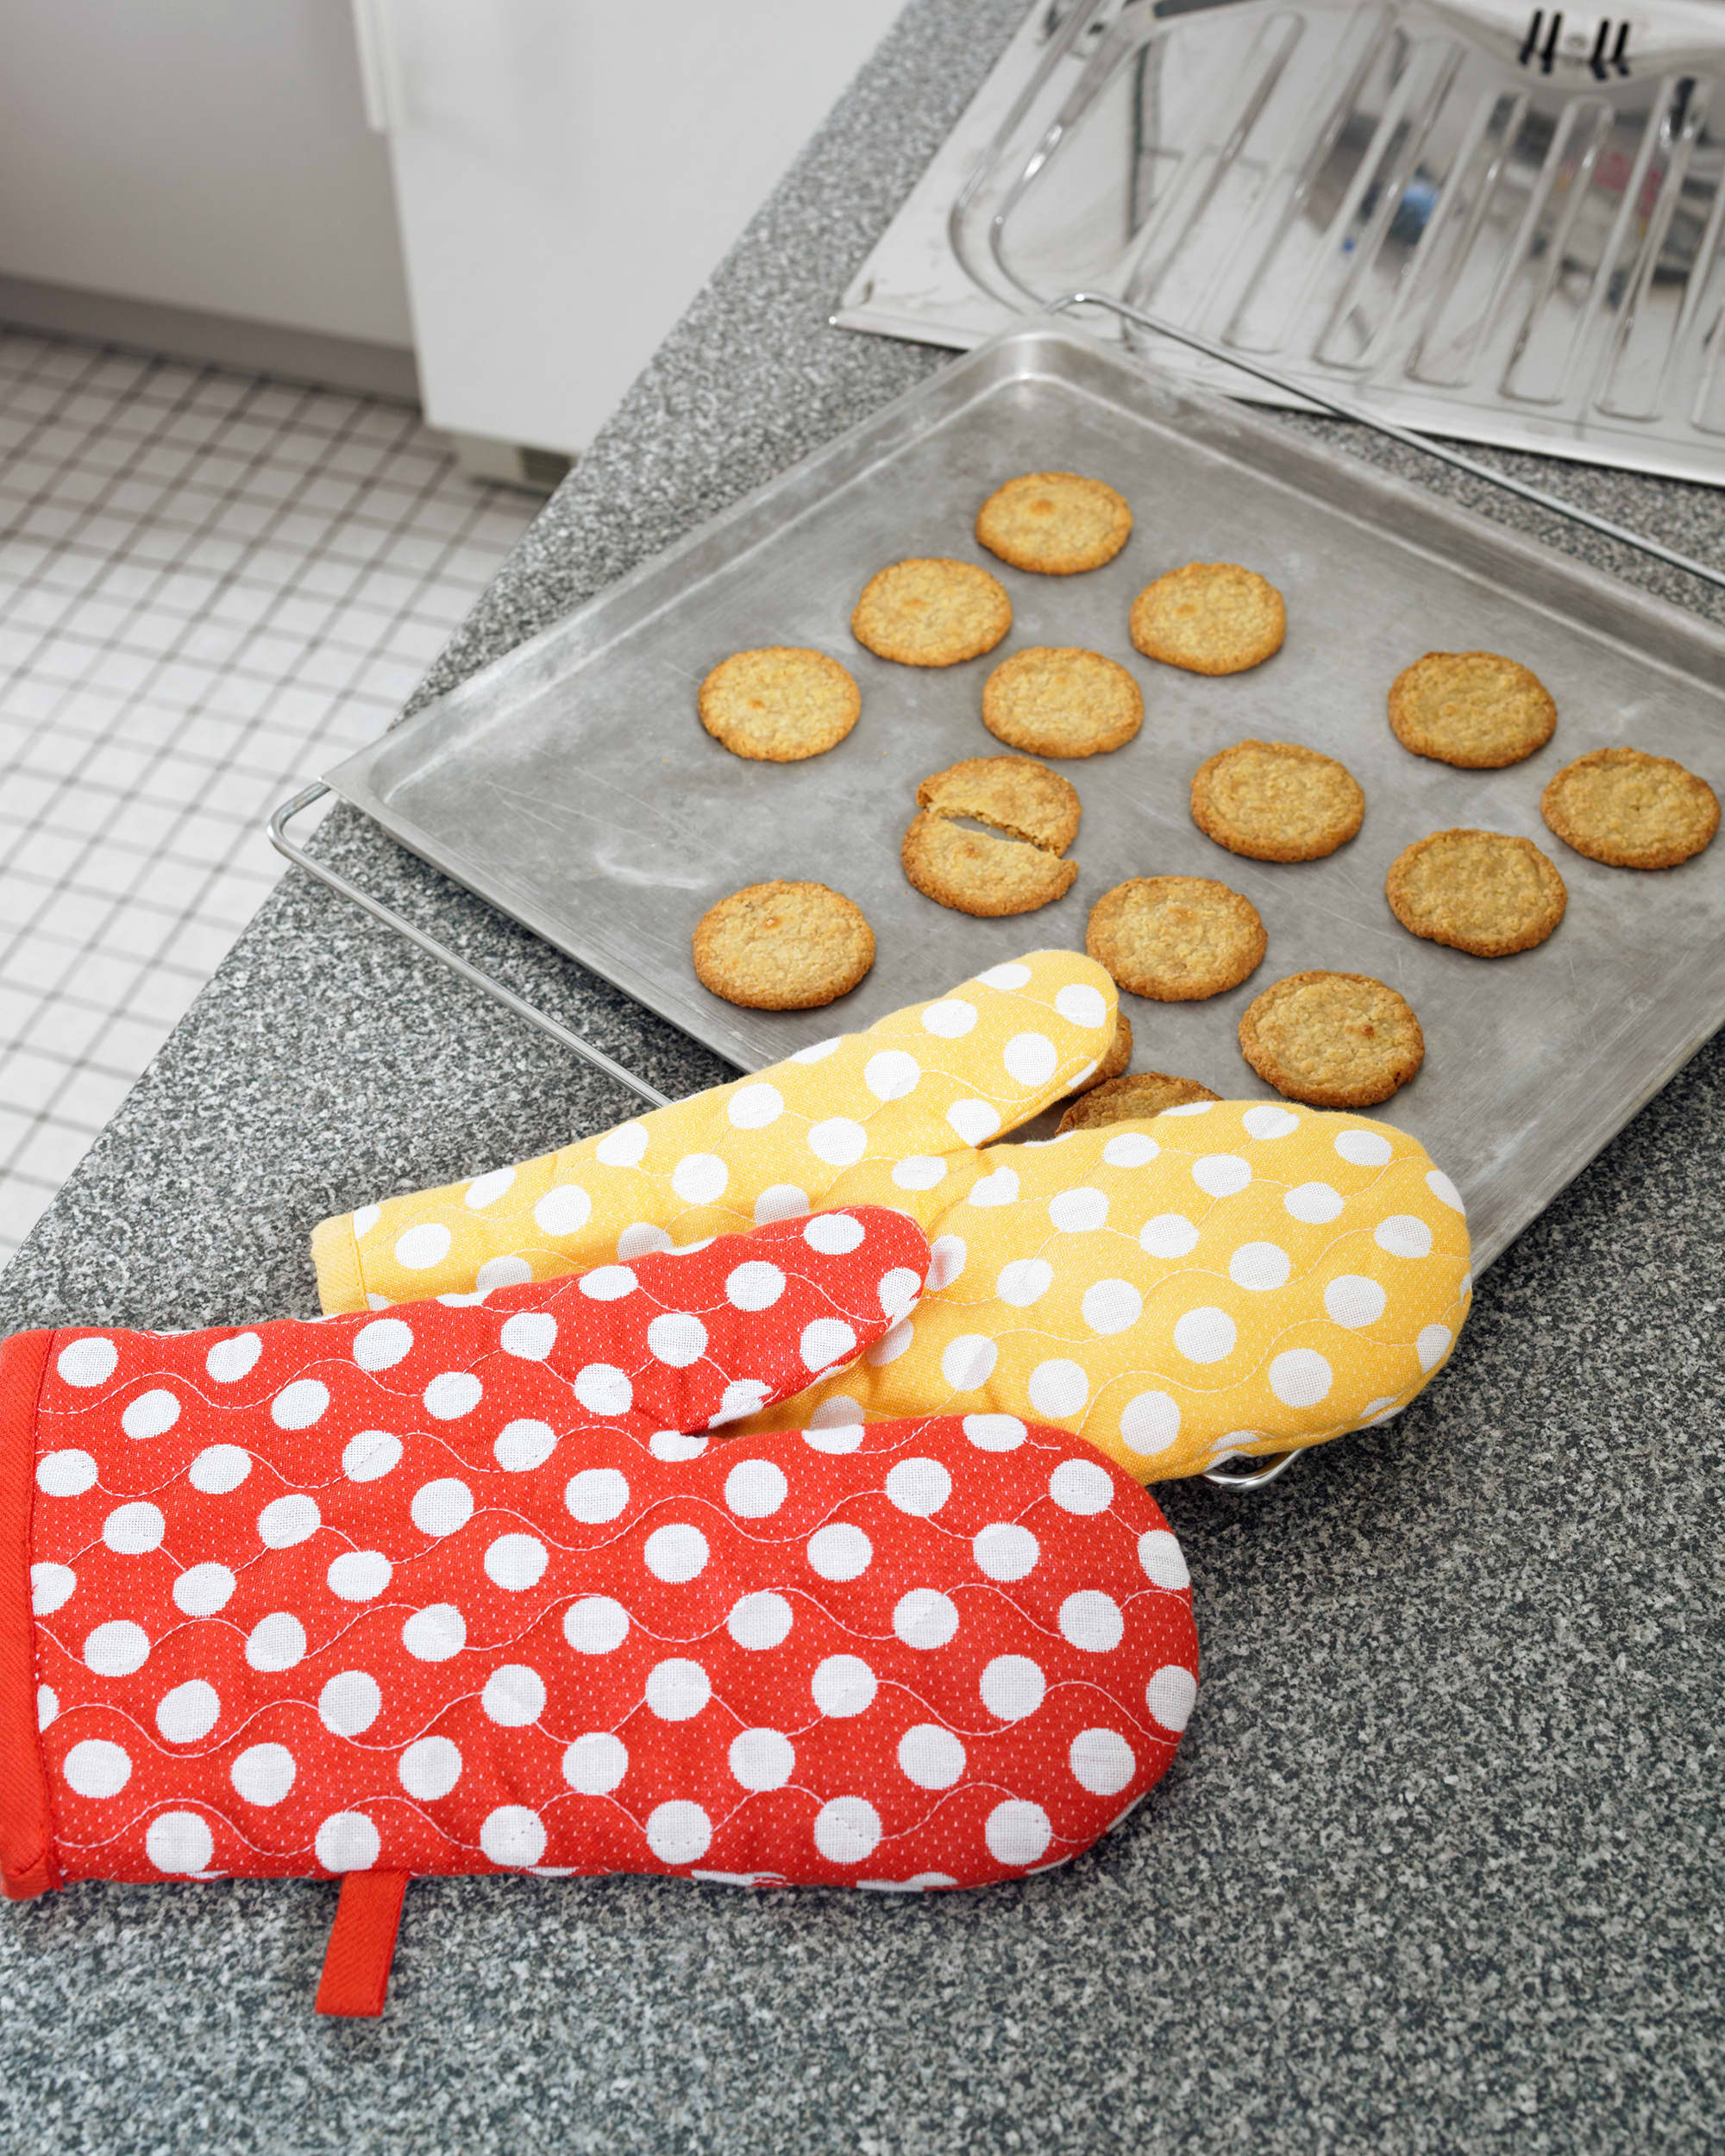 ITH Cutesy Christmas Oven Mitts